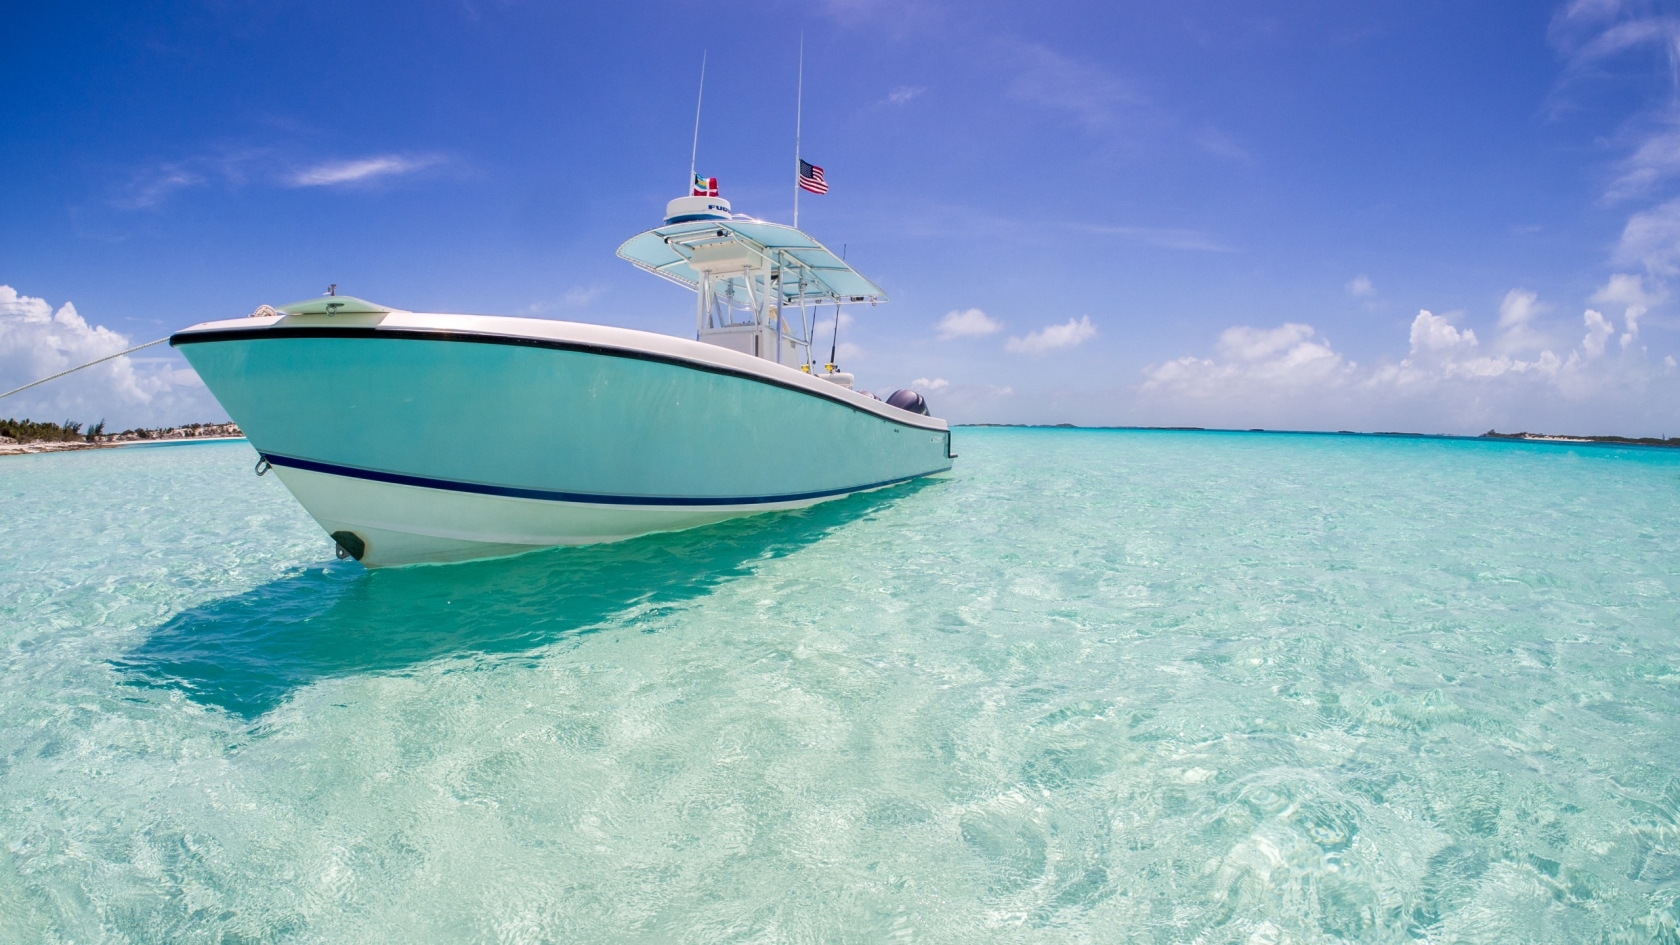 Boat in Paradise for 1680 x 945 HDTV resolution